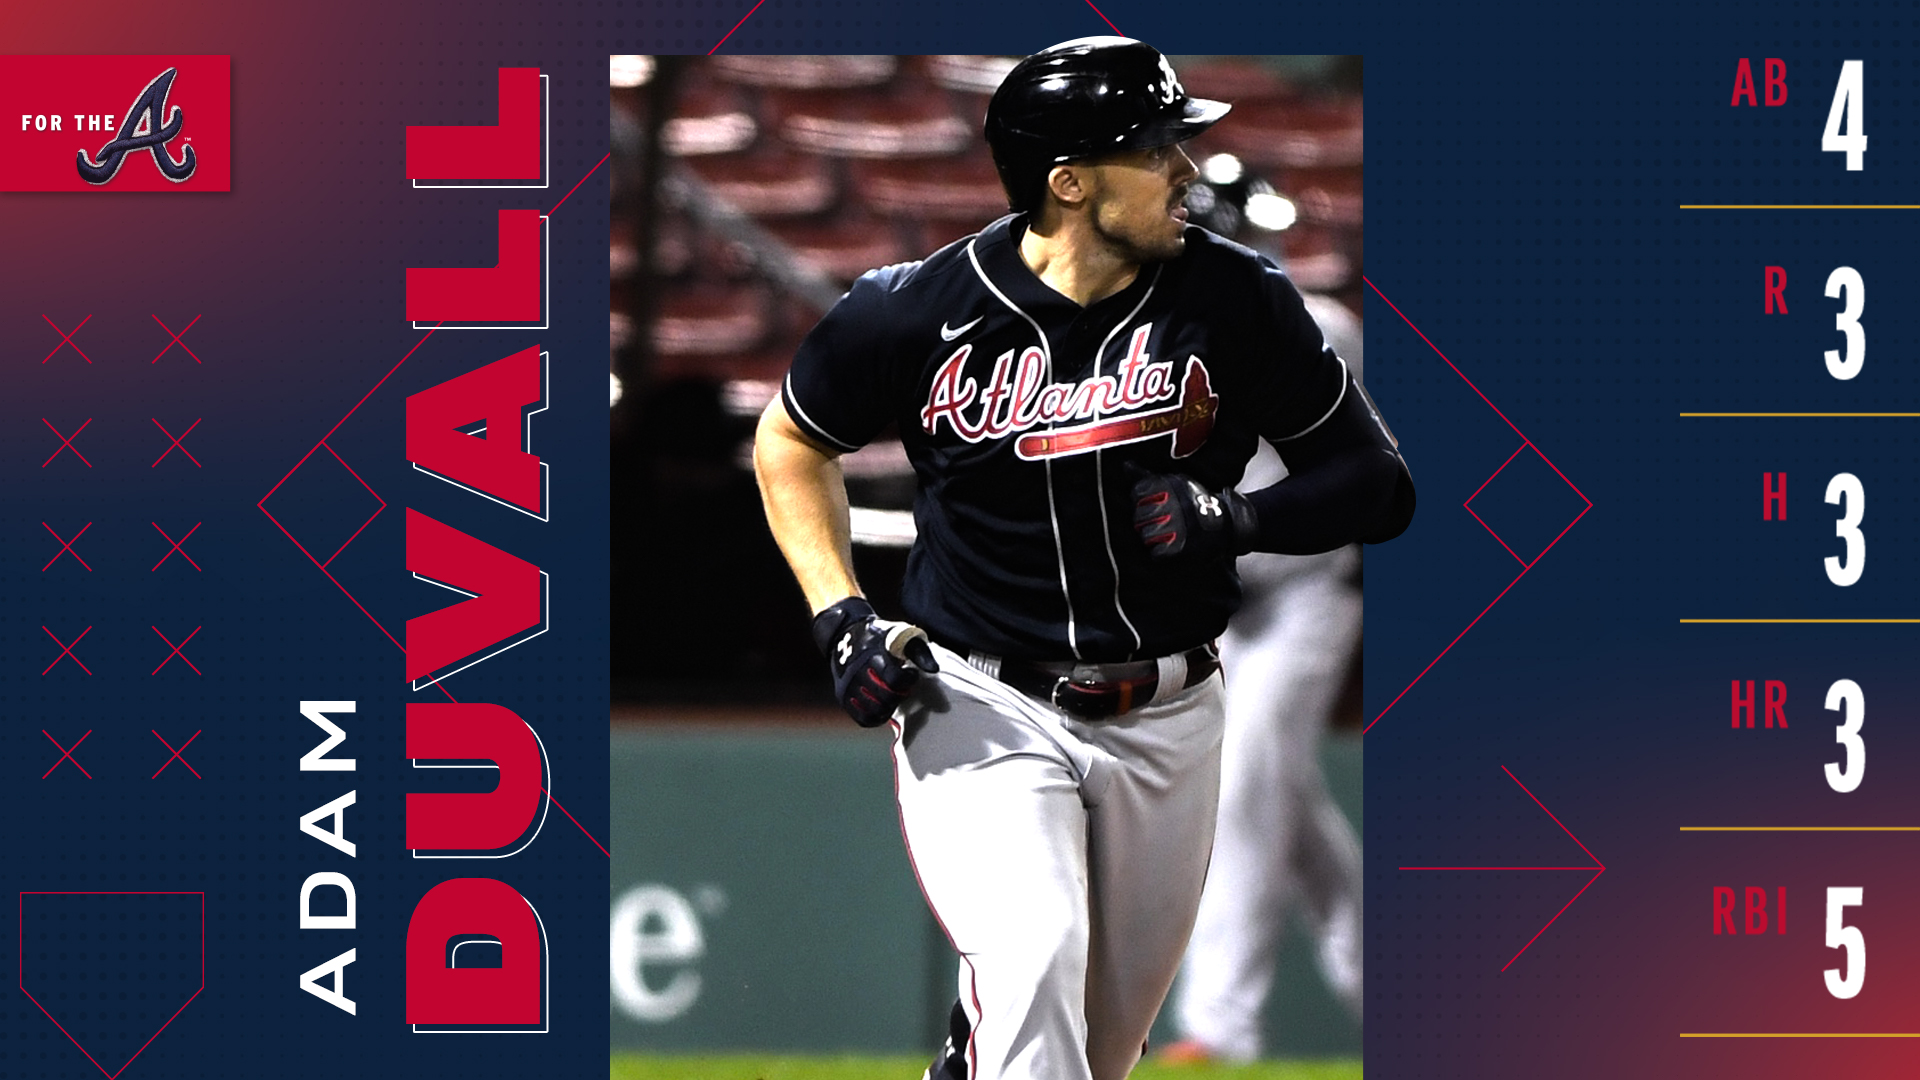 Atlanta Braves on X: Duvall the dingers. #FOrTheA